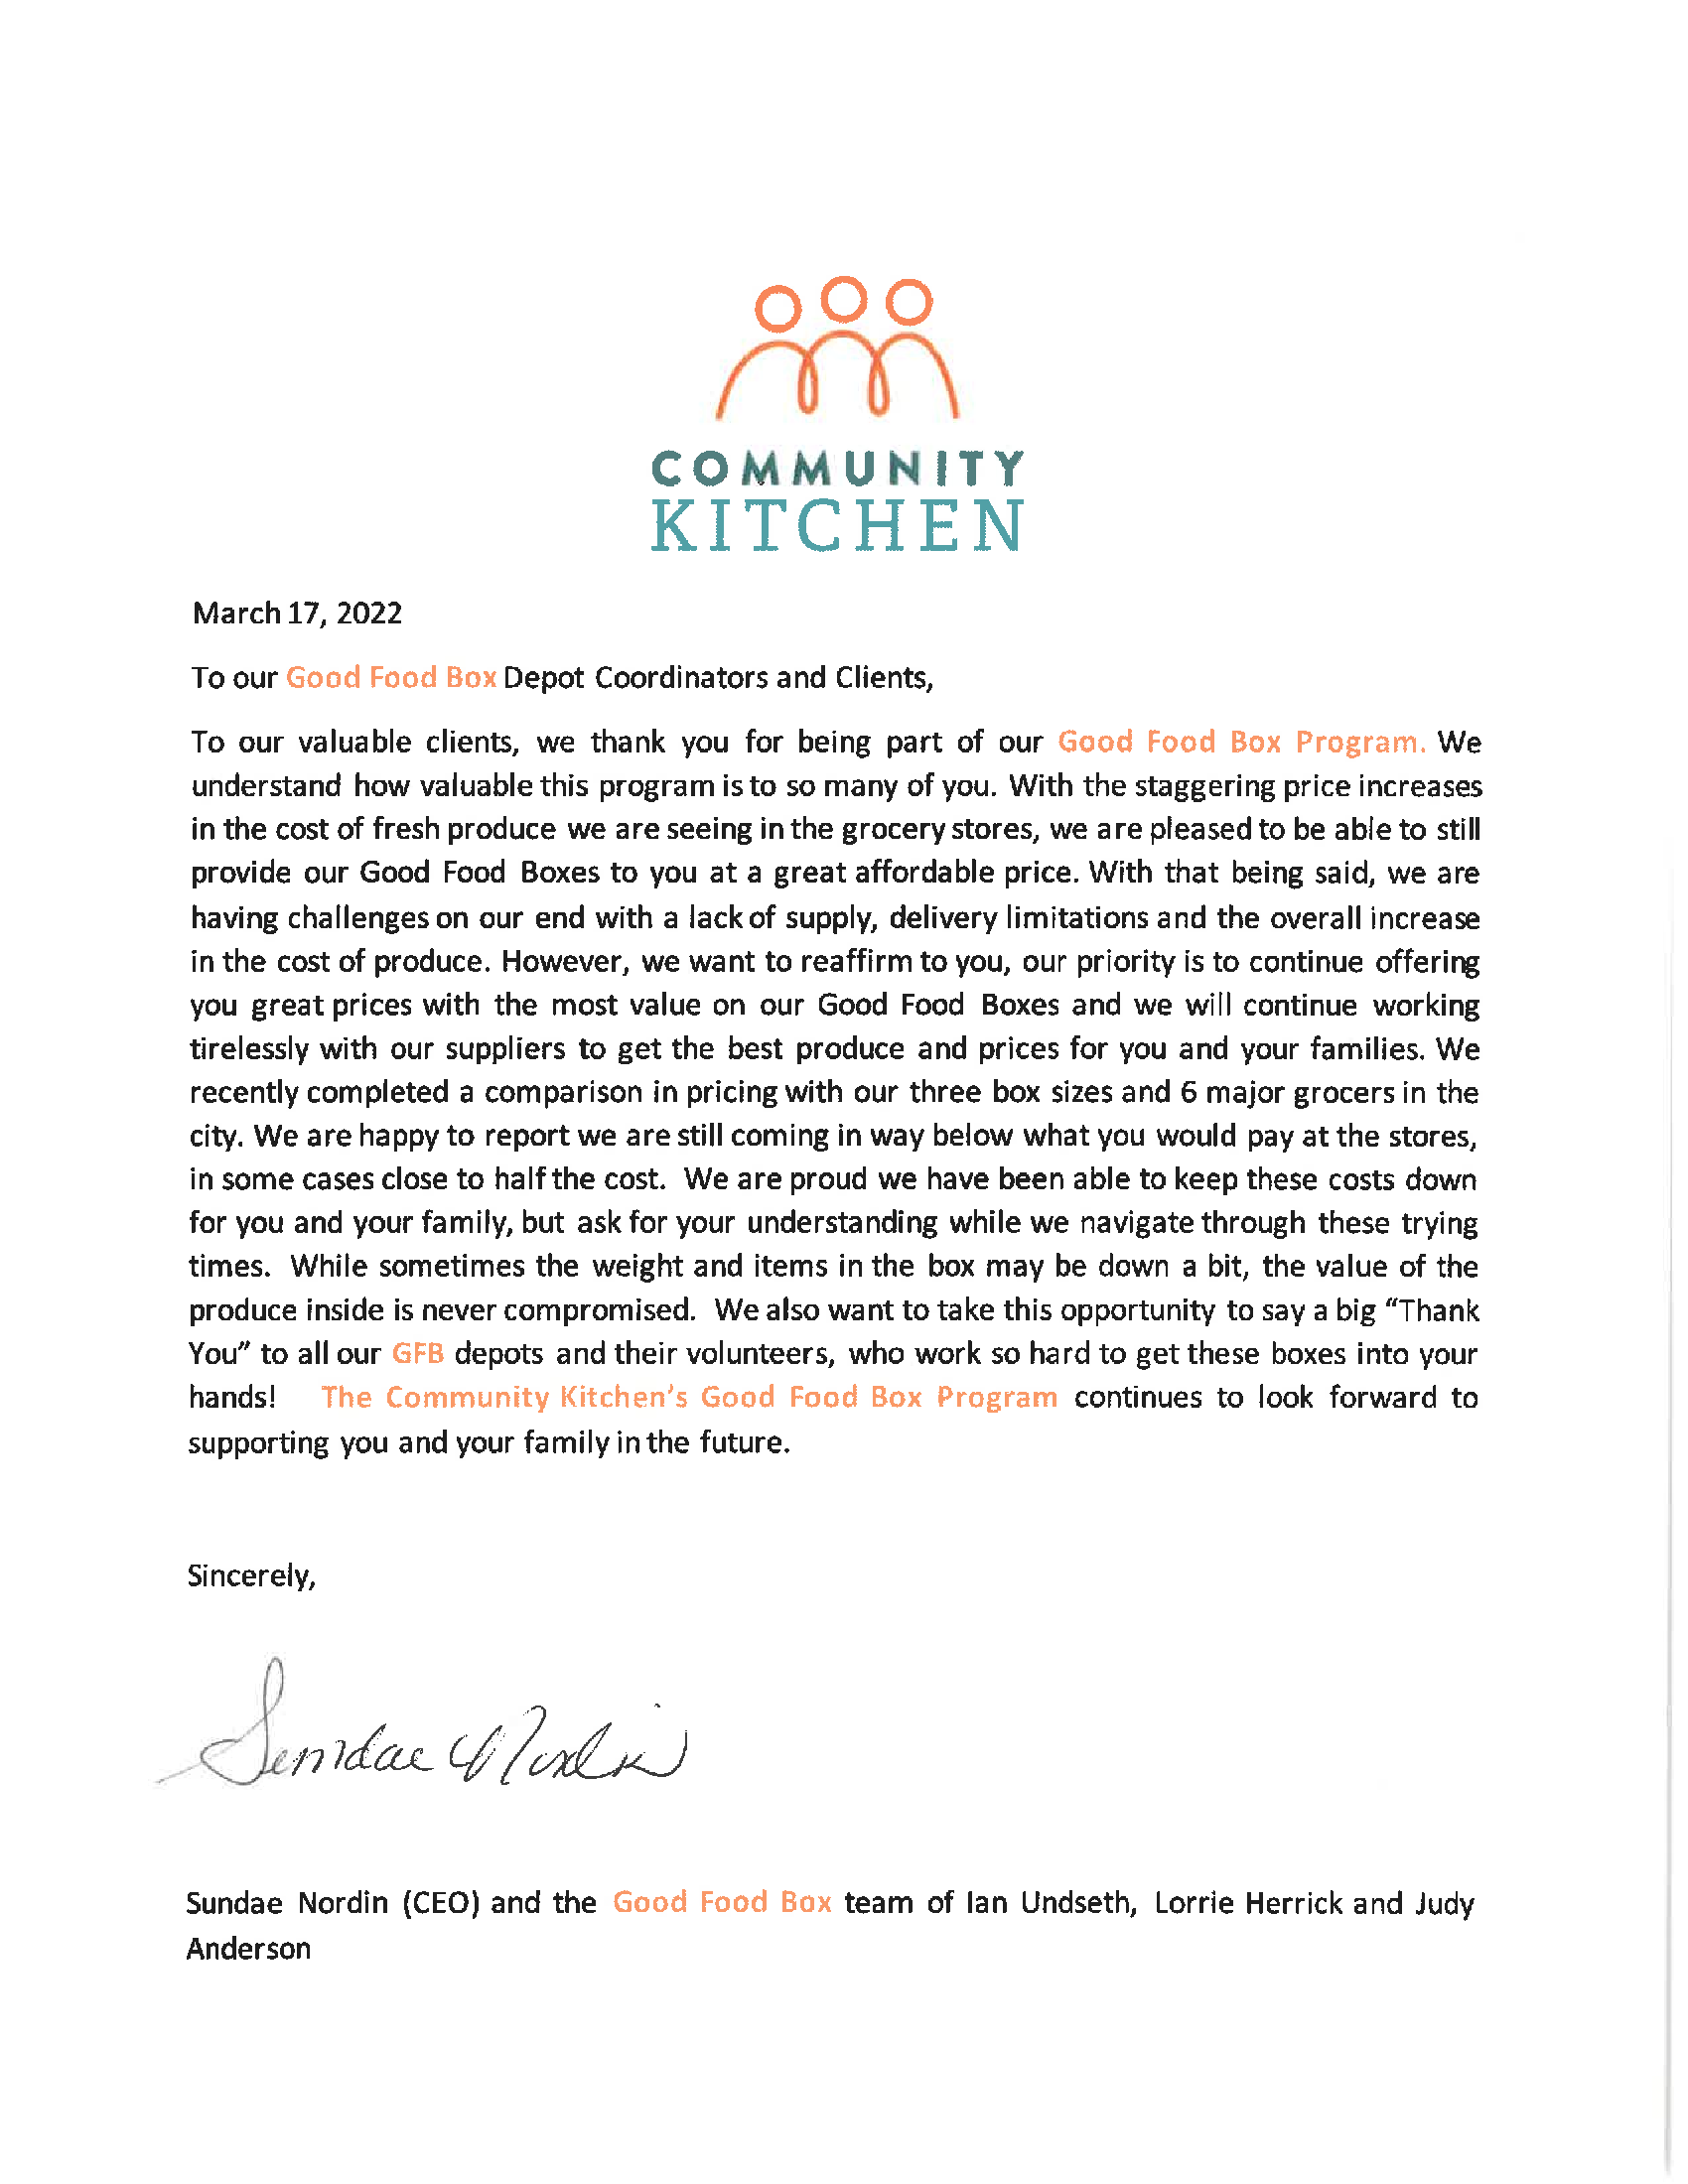 A Letter From Community Kitchen Concerning Good Food Box Pricing